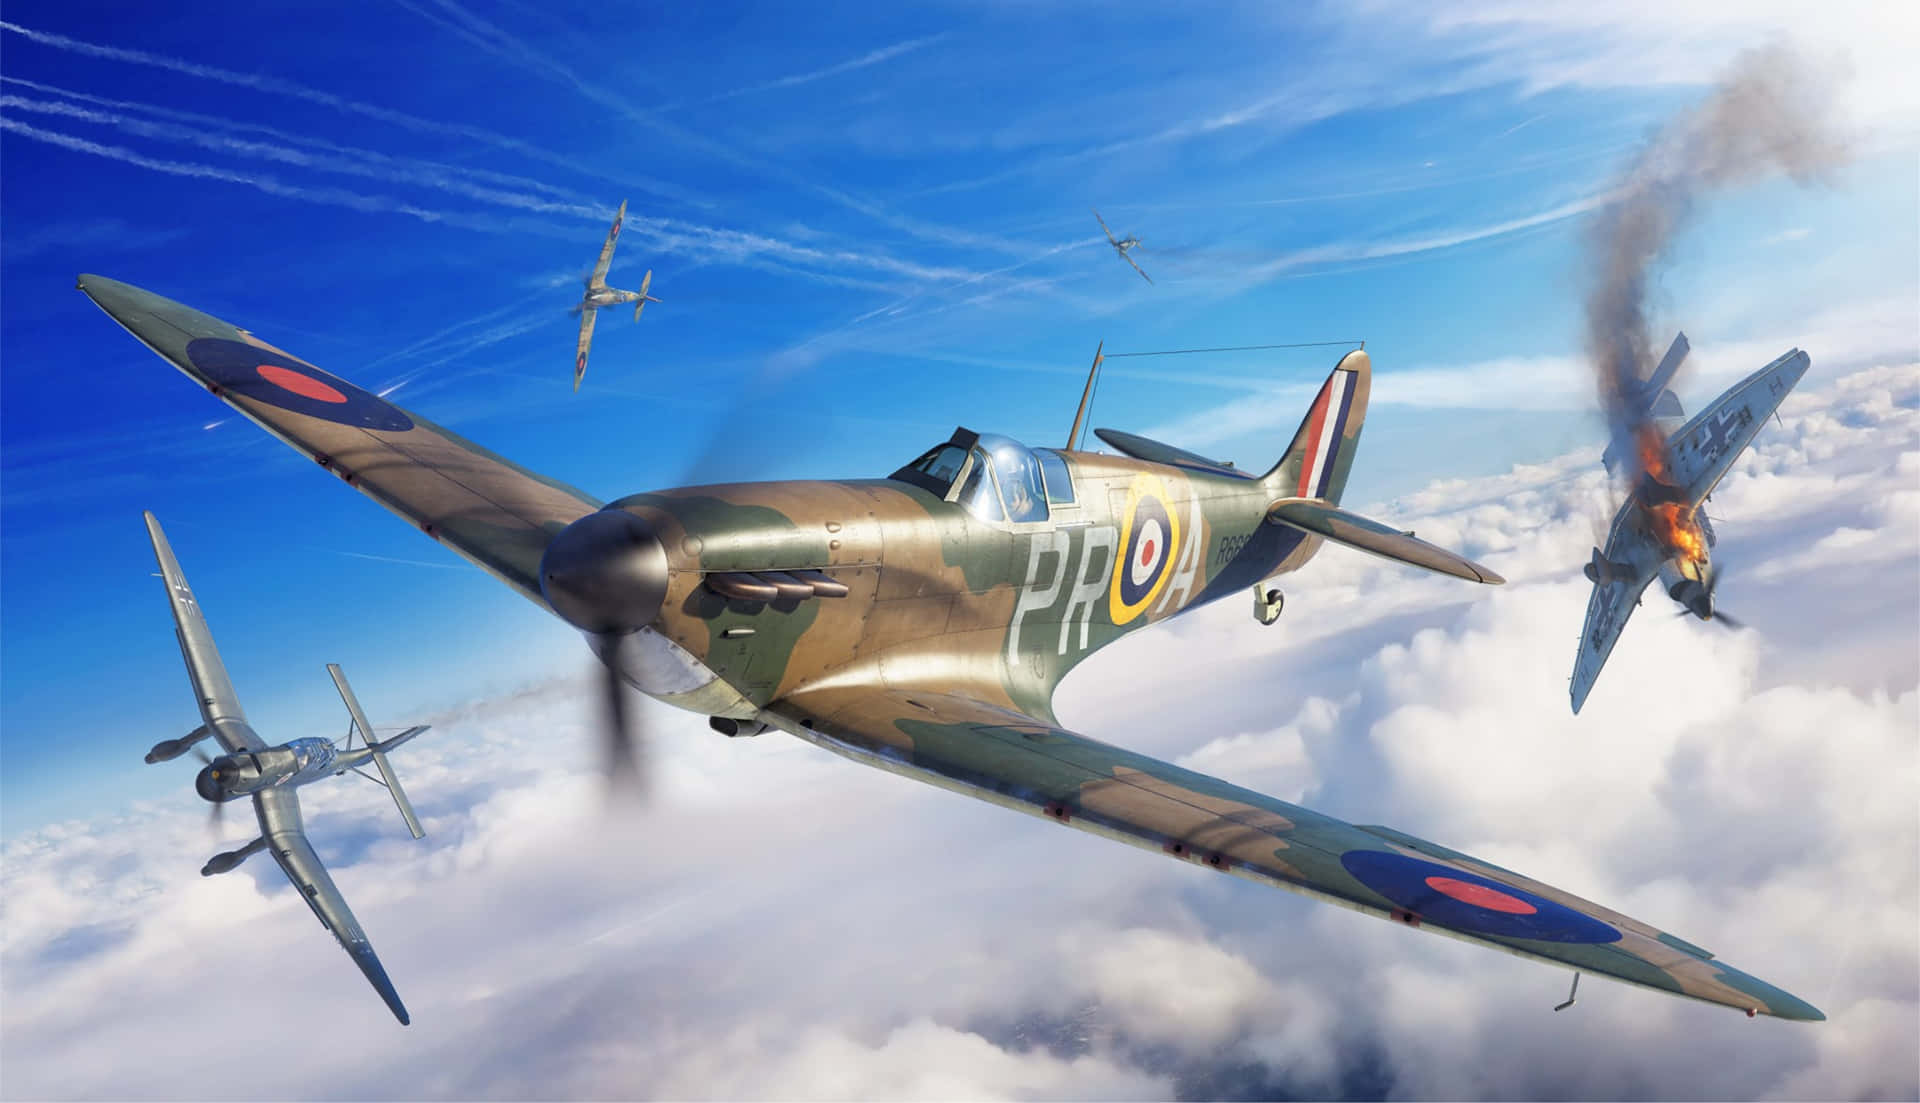 Beautiful British military aircraft, the Spitfire, soaring through the clouds. Wallpaper